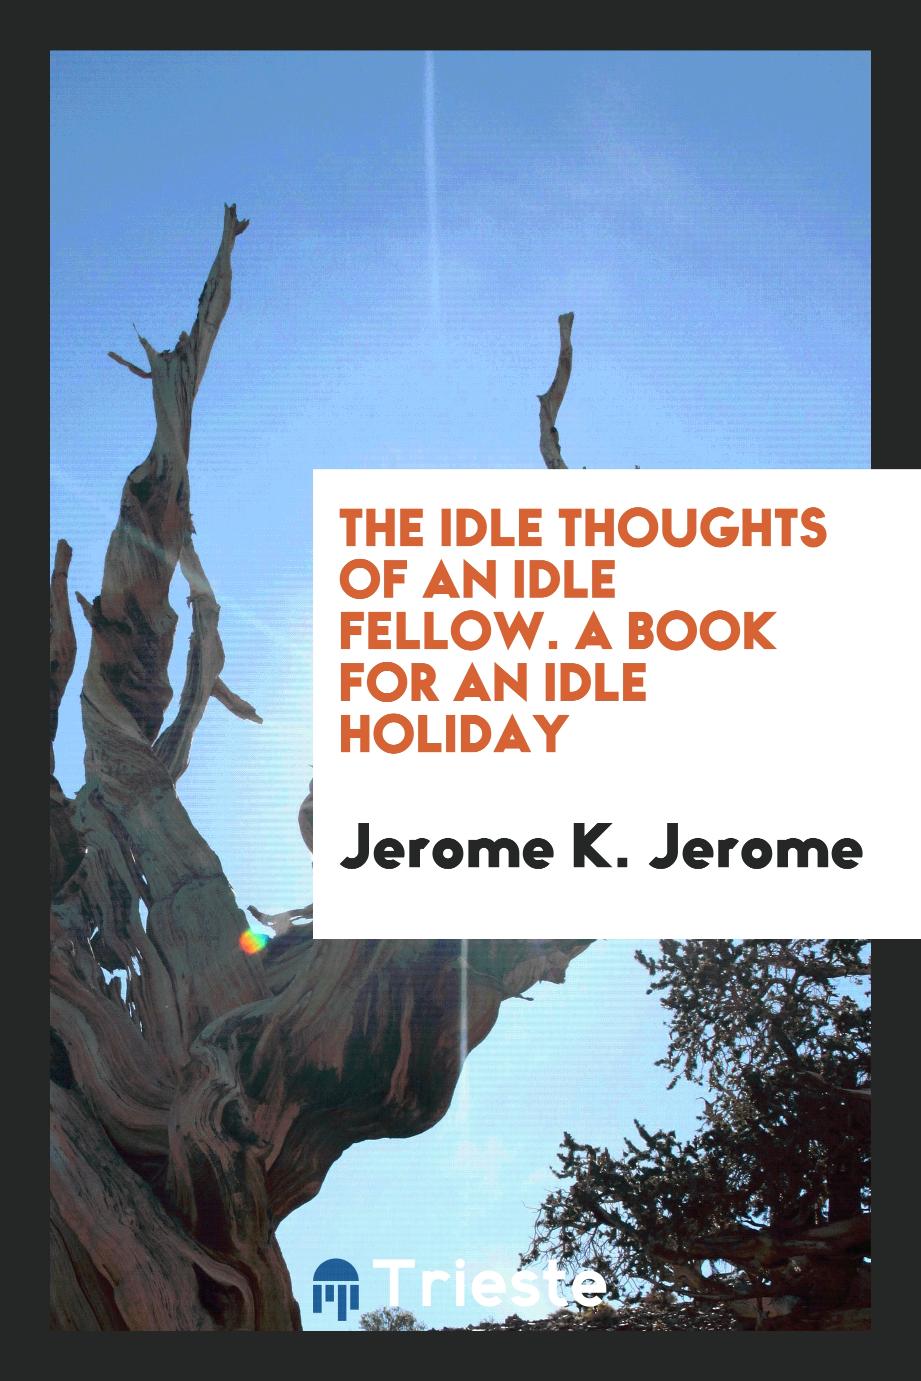 The Idle Thoughts of an Idle Fellow. A Book for an Idle Holiday